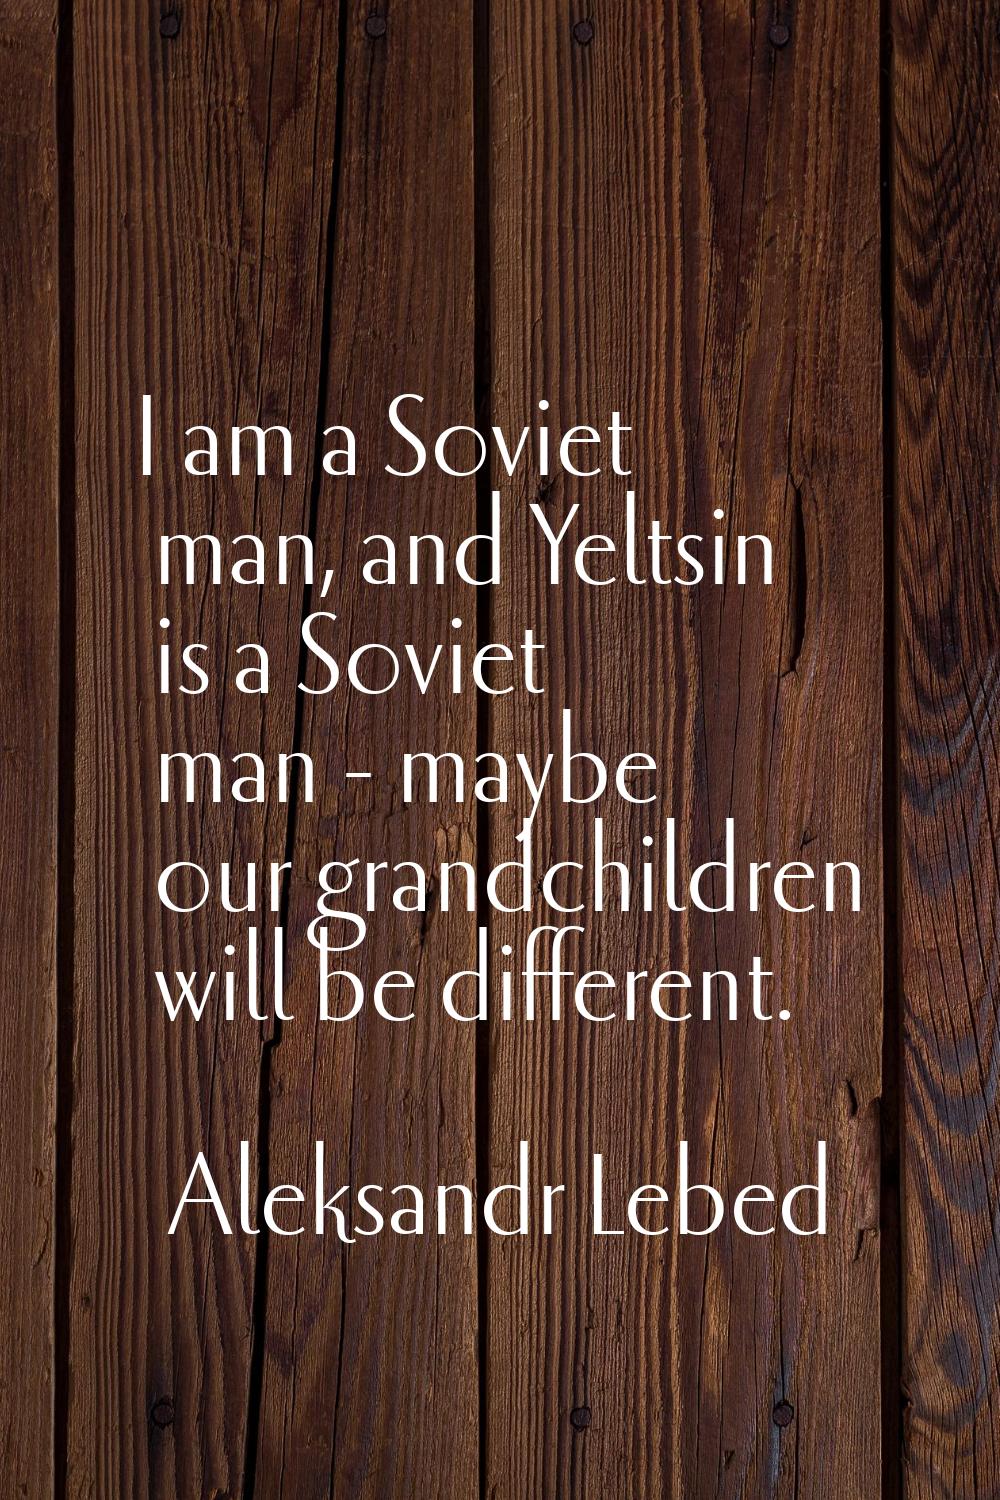 I am a Soviet man, and Yeltsin is a Soviet man - maybe our grandchildren will be different.